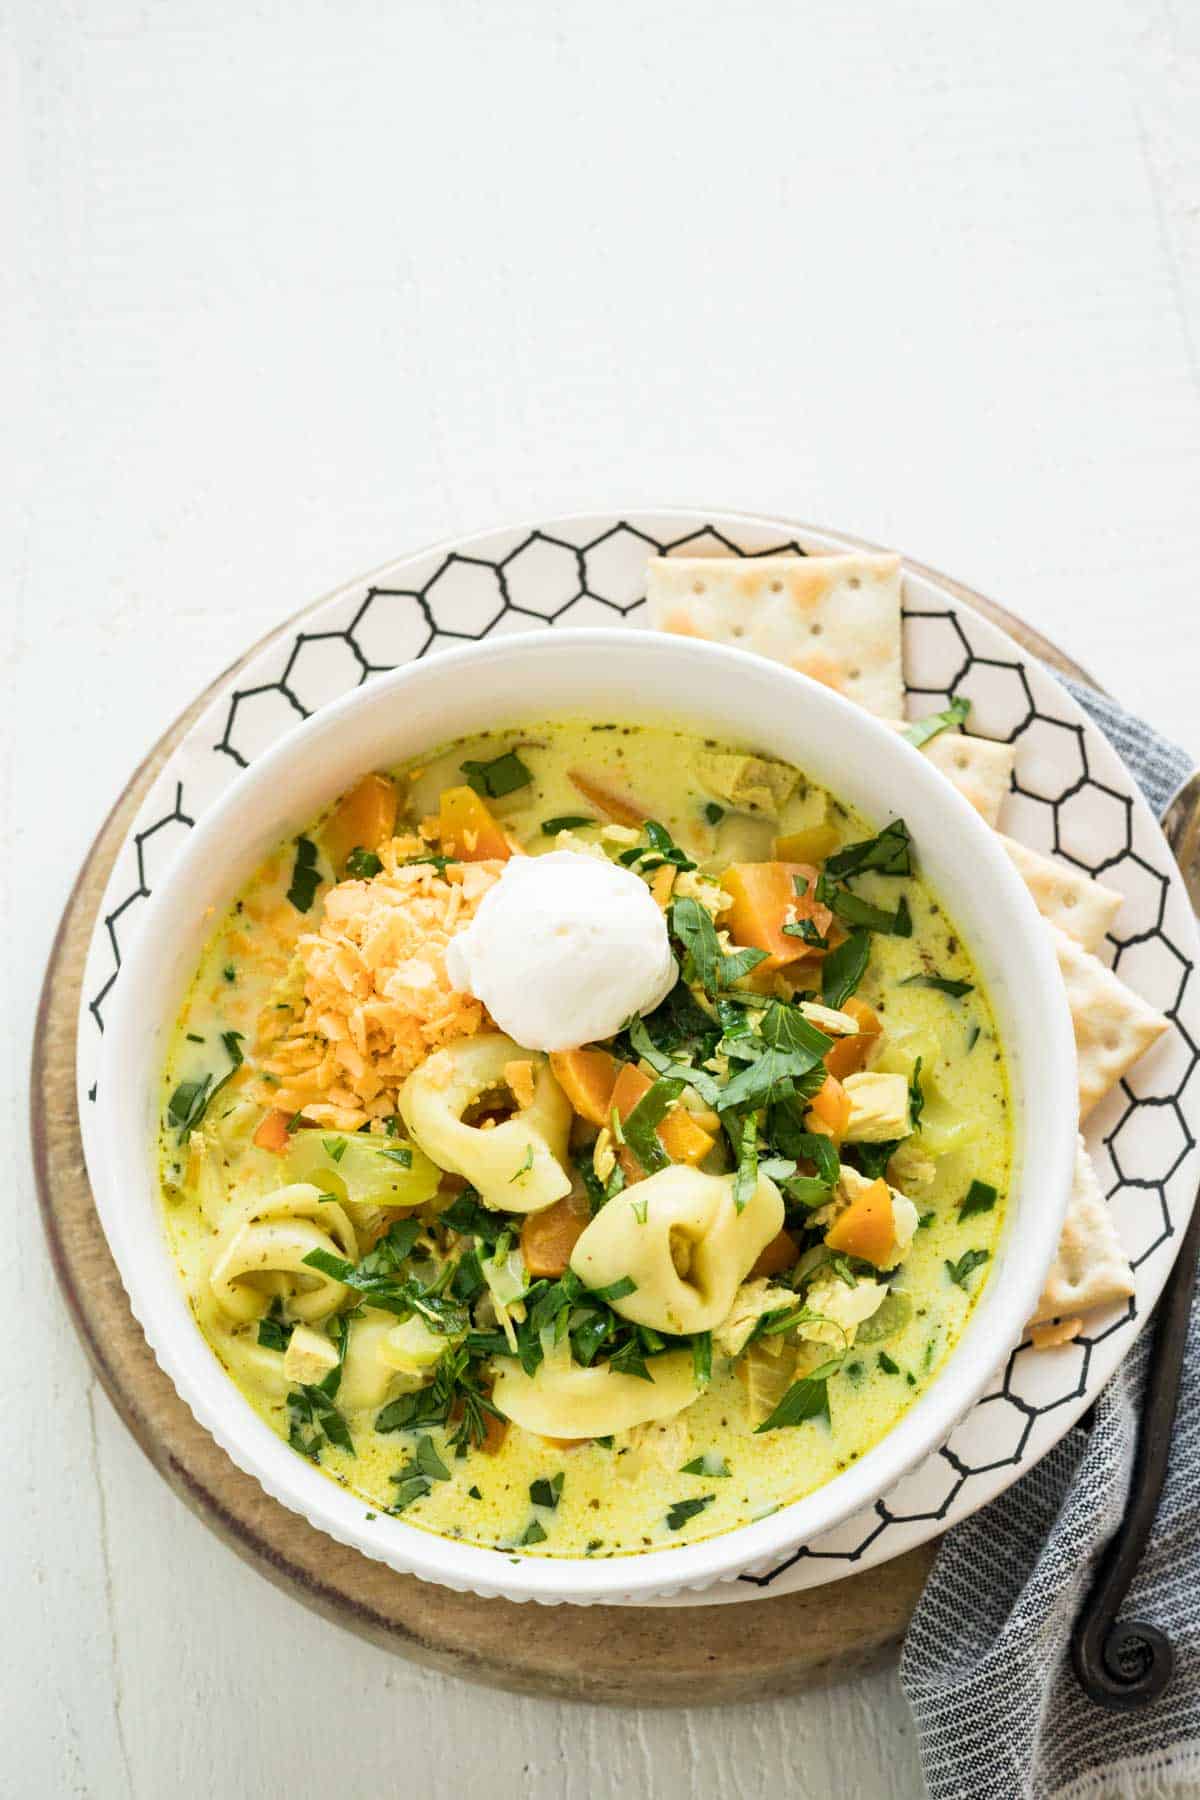 A bowl of soup with tortellini, spinach, and carrots topped with grated cheddar cheese and sour cream.